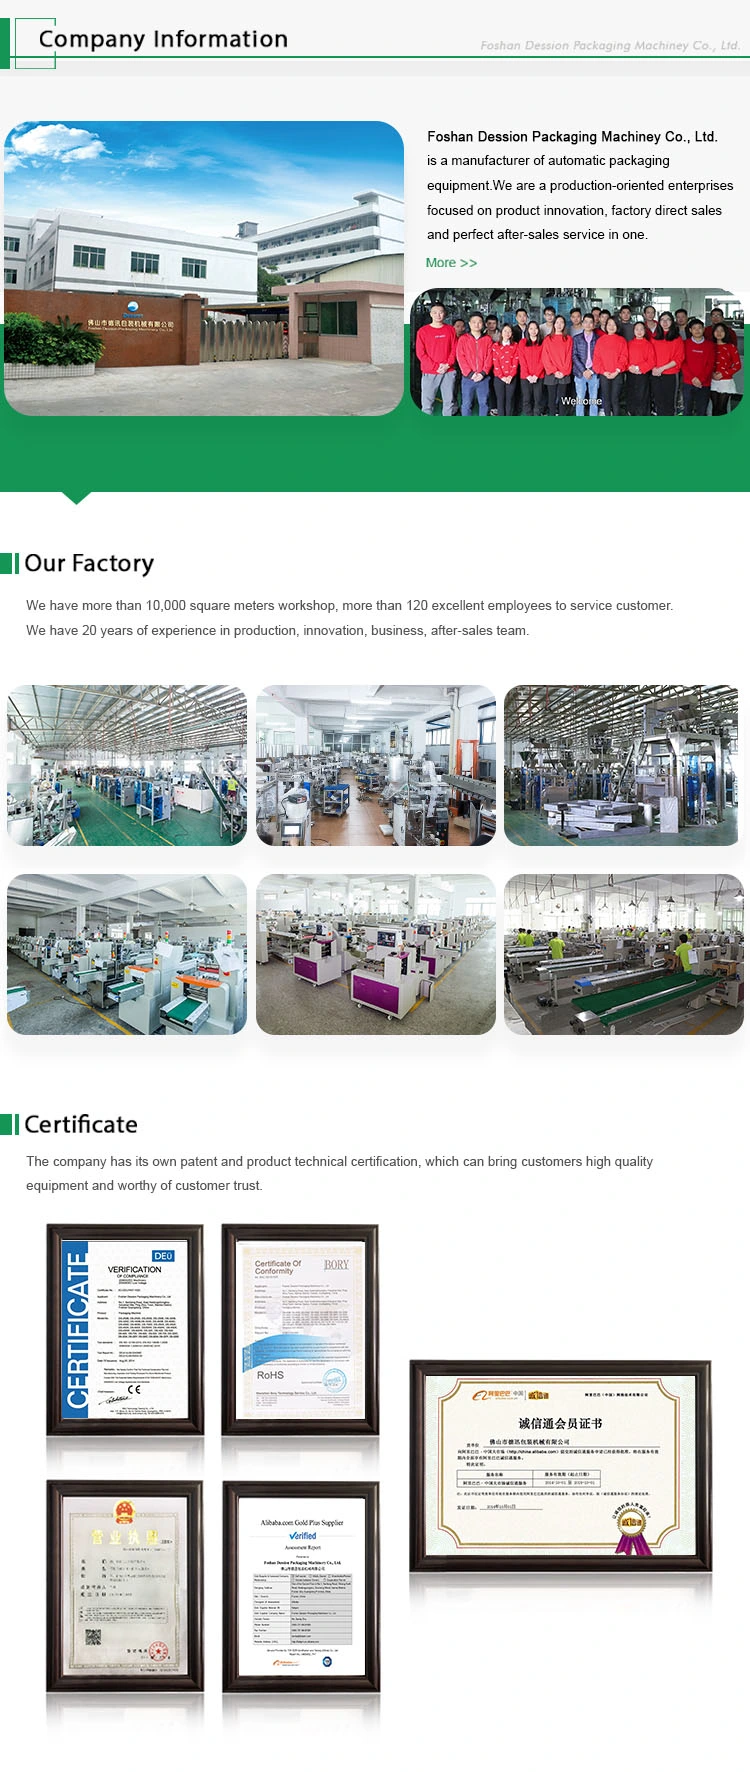 Instant Milk Tea Powder Packing Machinery Drink Powder Auto Filling and Packaging Machine